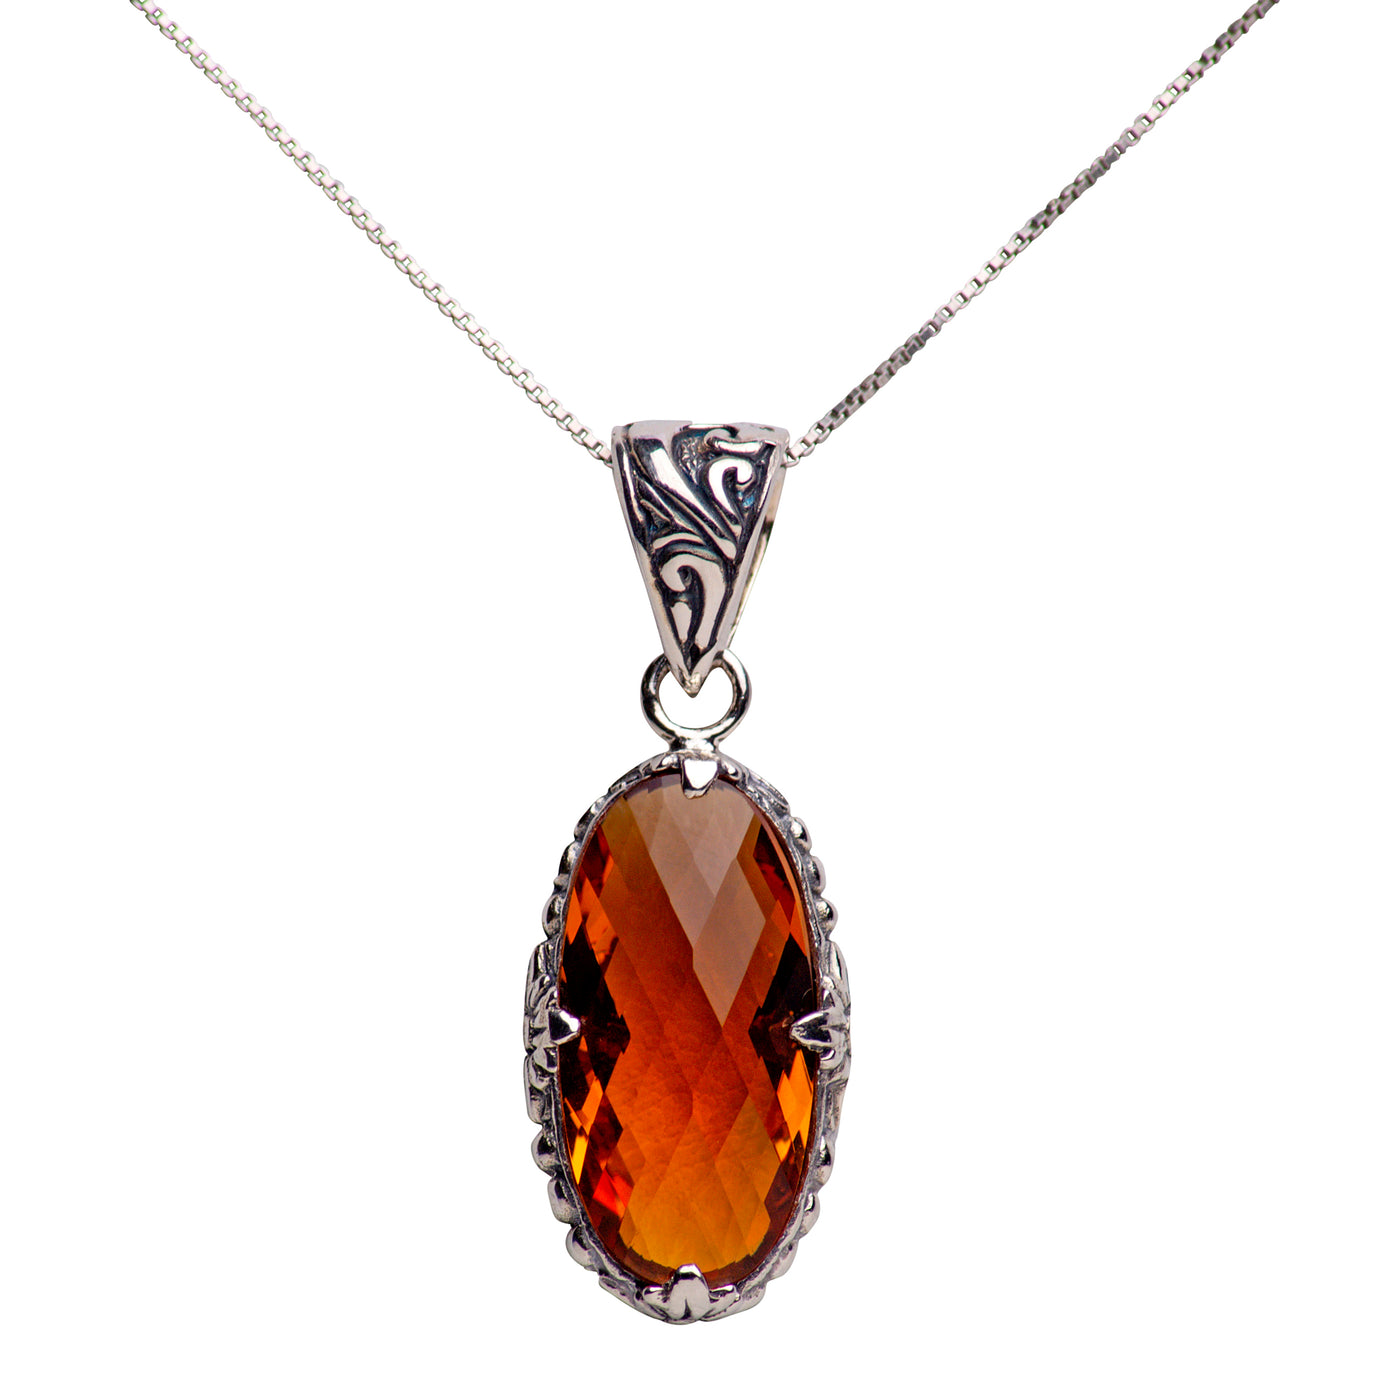 Oval Citrine Quartz and Sterling Silver Pendant Necklace